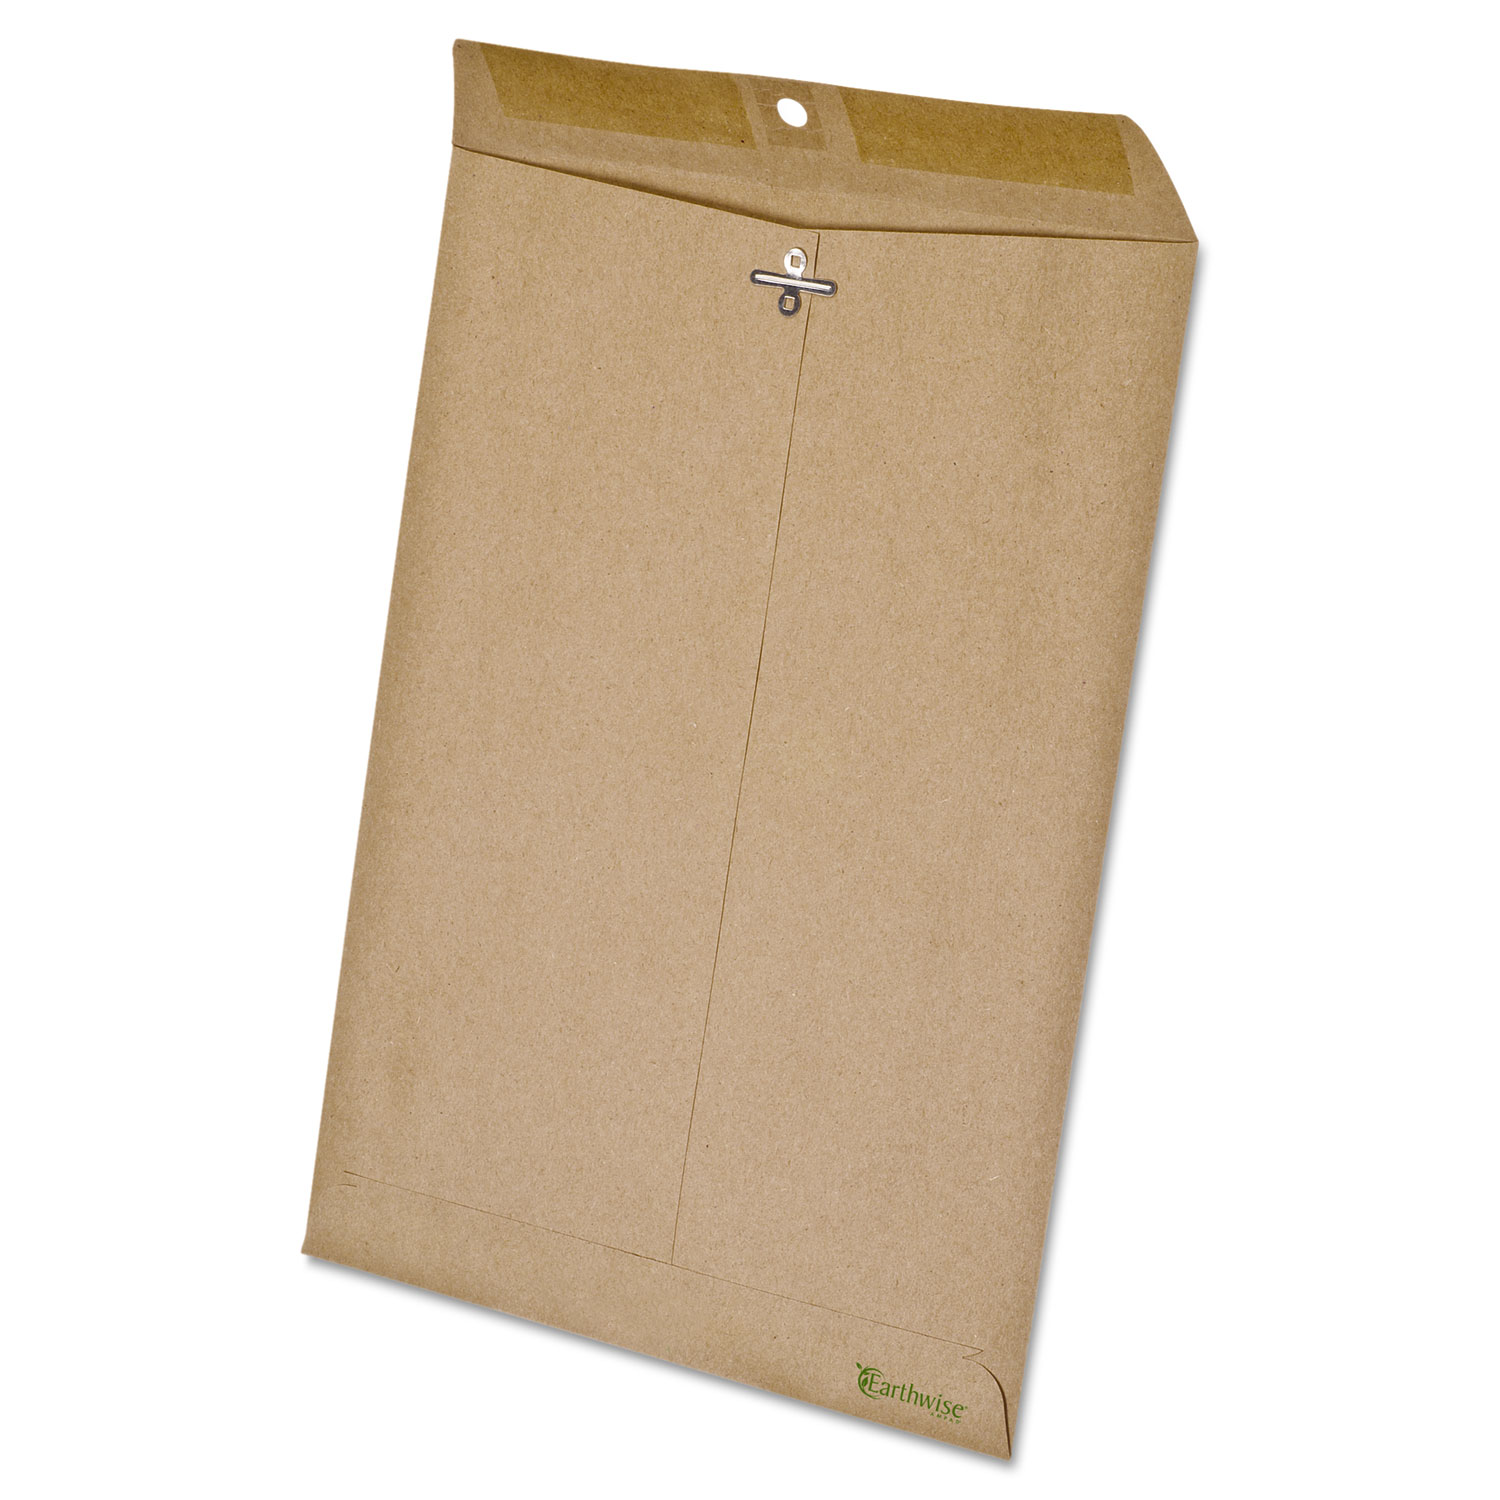 Earthwise by Ampad 100% Recycled Paper Clasp Envelope, 9 x 12, Brown, 110/Box